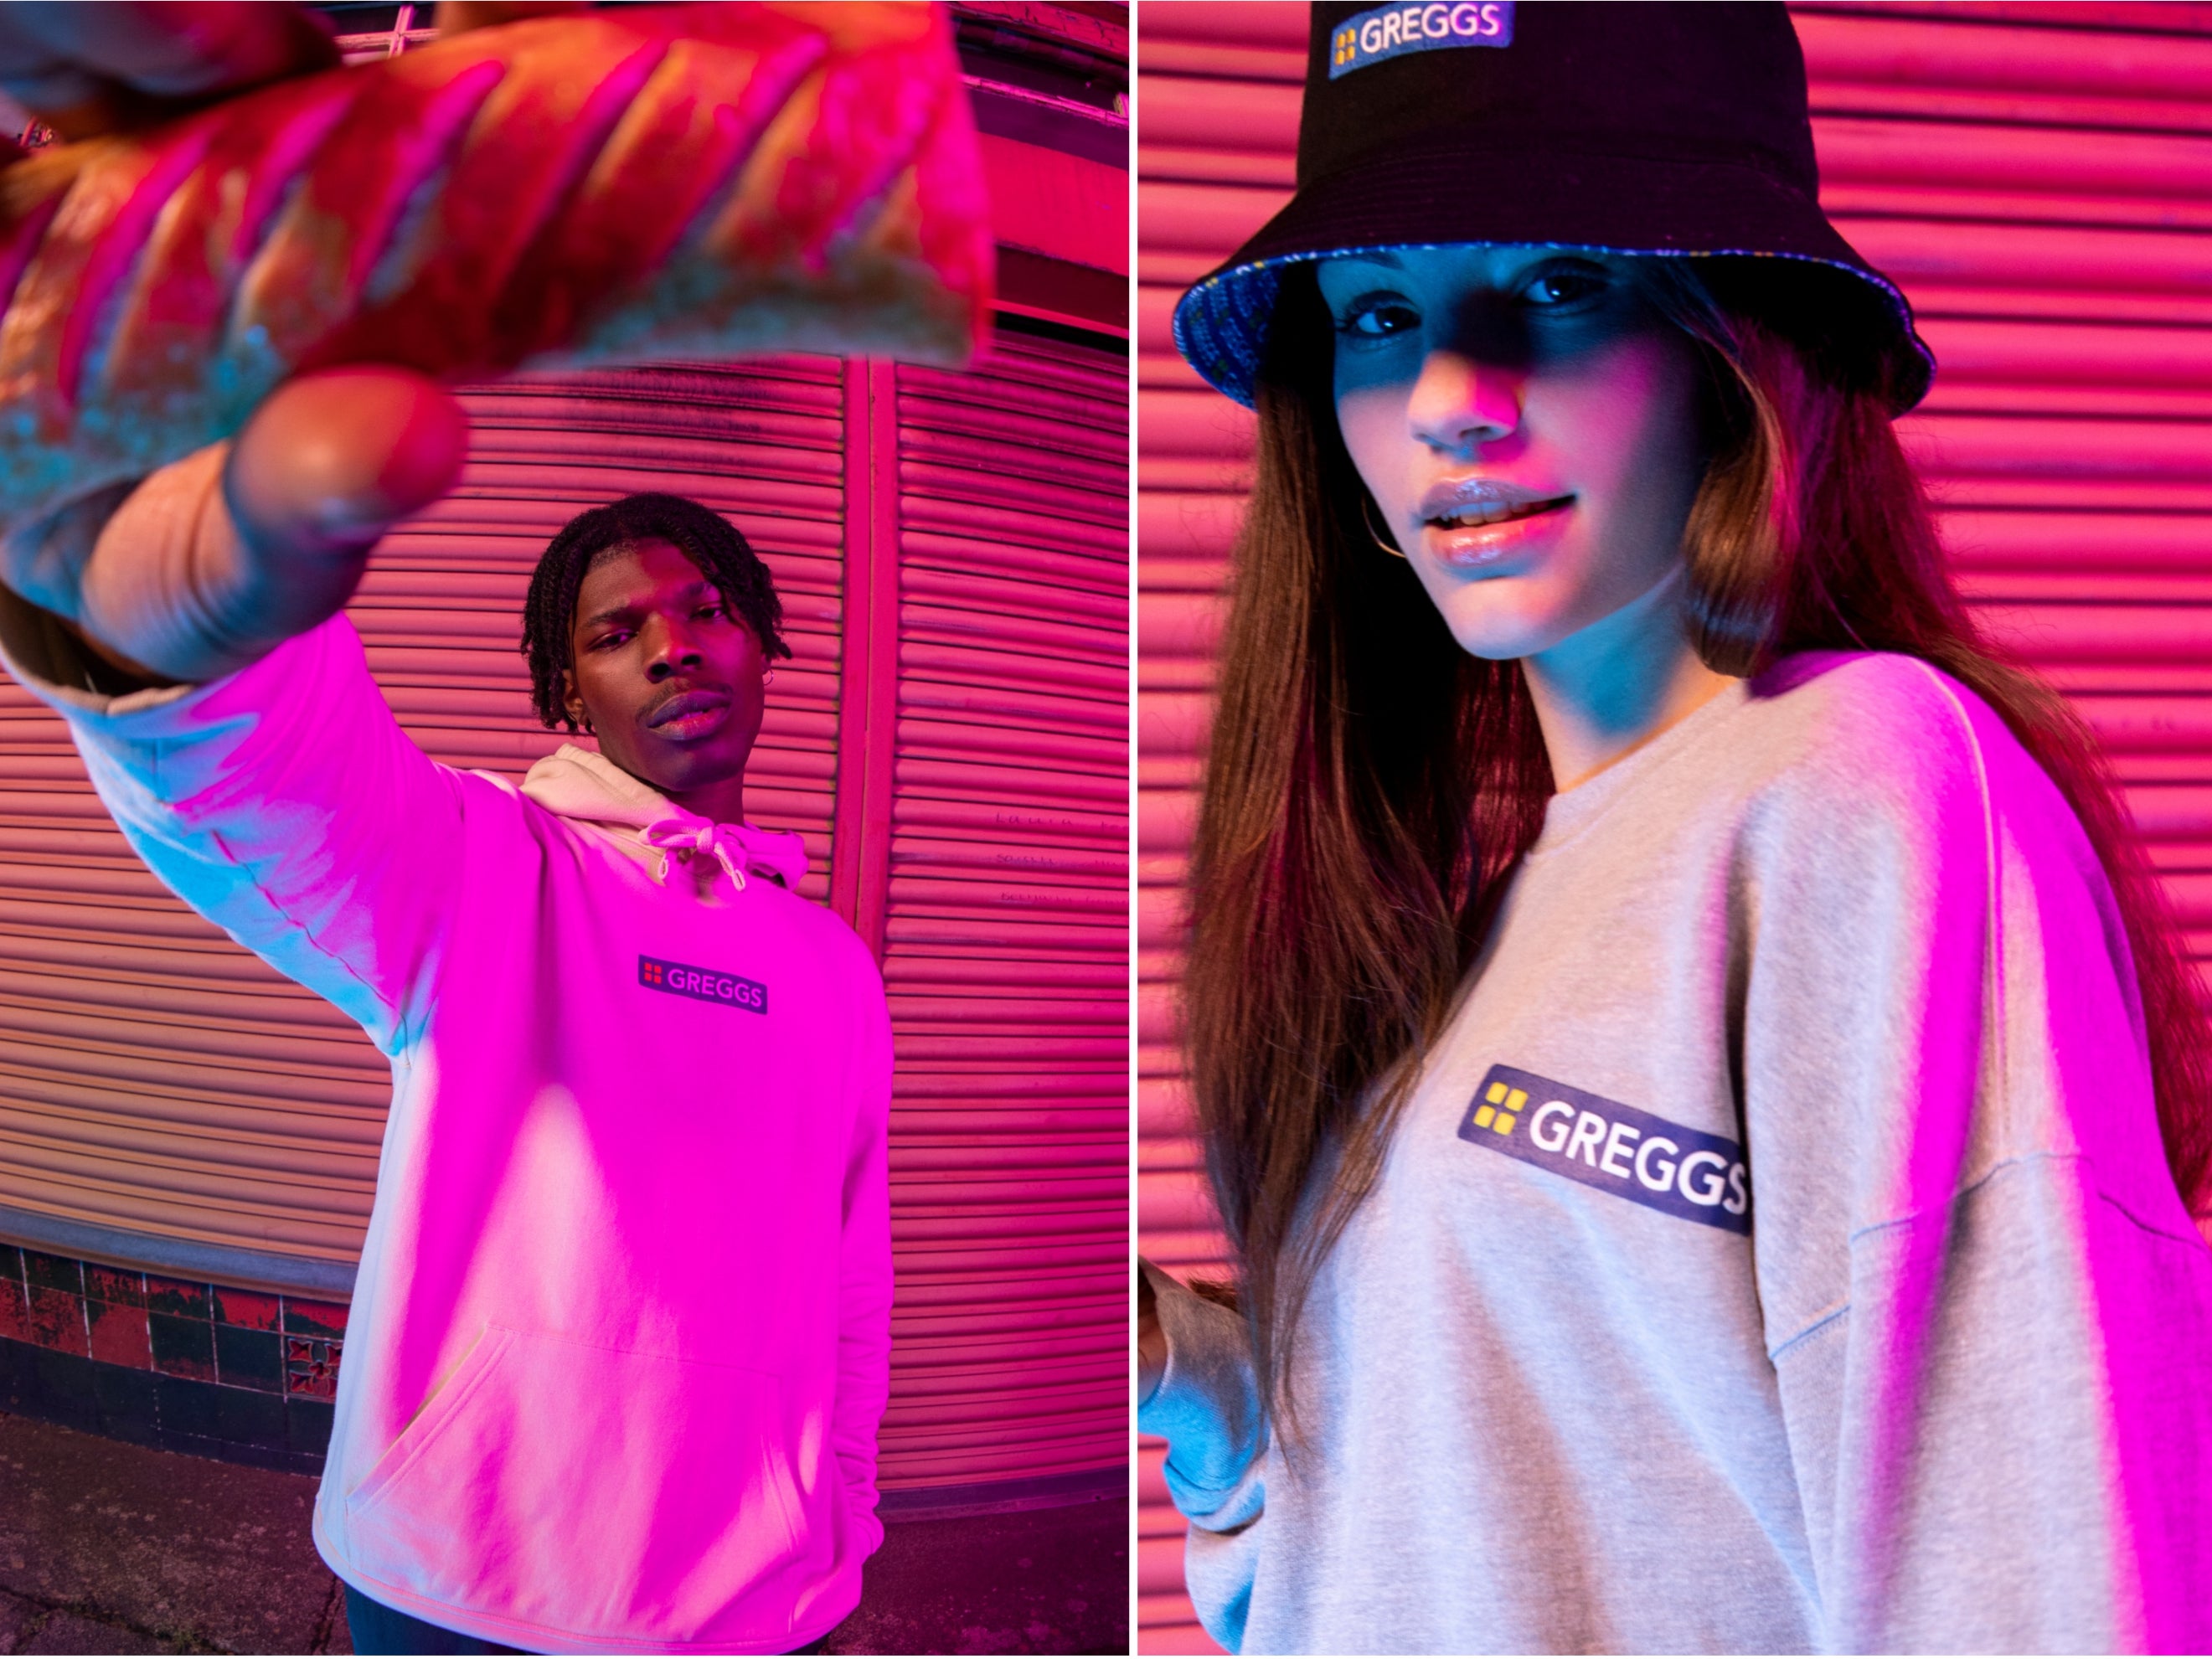 The 11 piece collection features bucket hats, T-shirts and a tracksuit